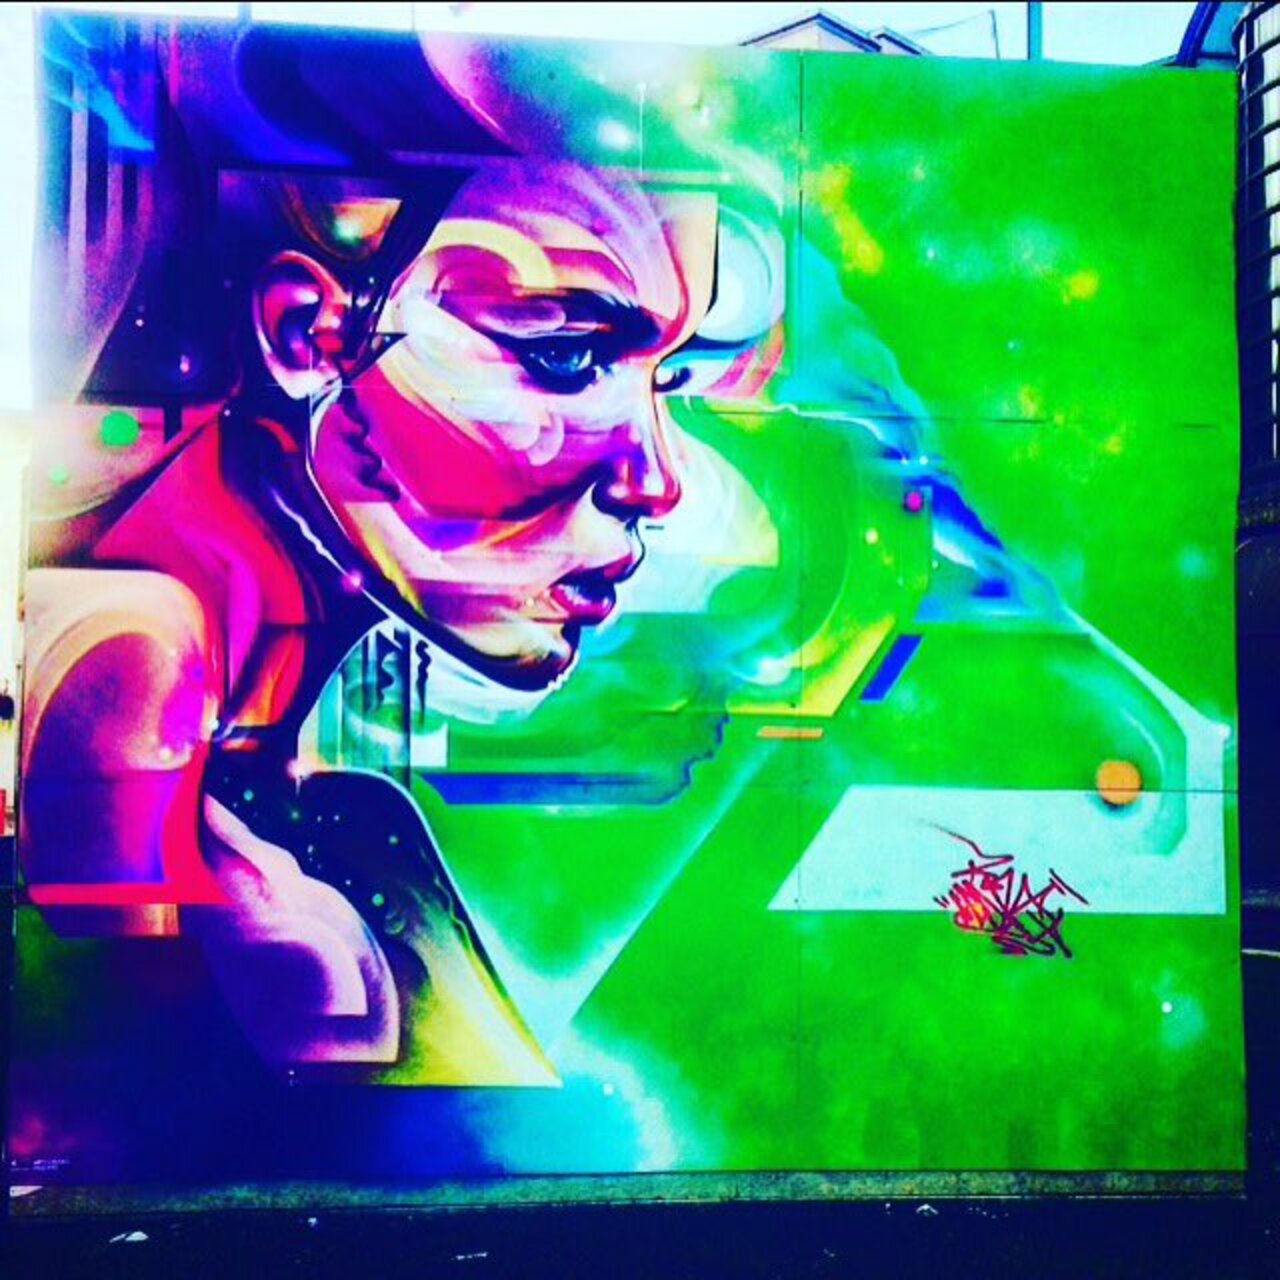 Check this out Great #streetart #streetphotography in #Gloucester #lgbt #lgbtq @rtglos @rtchelt https://t.co/fpyazjPU9E